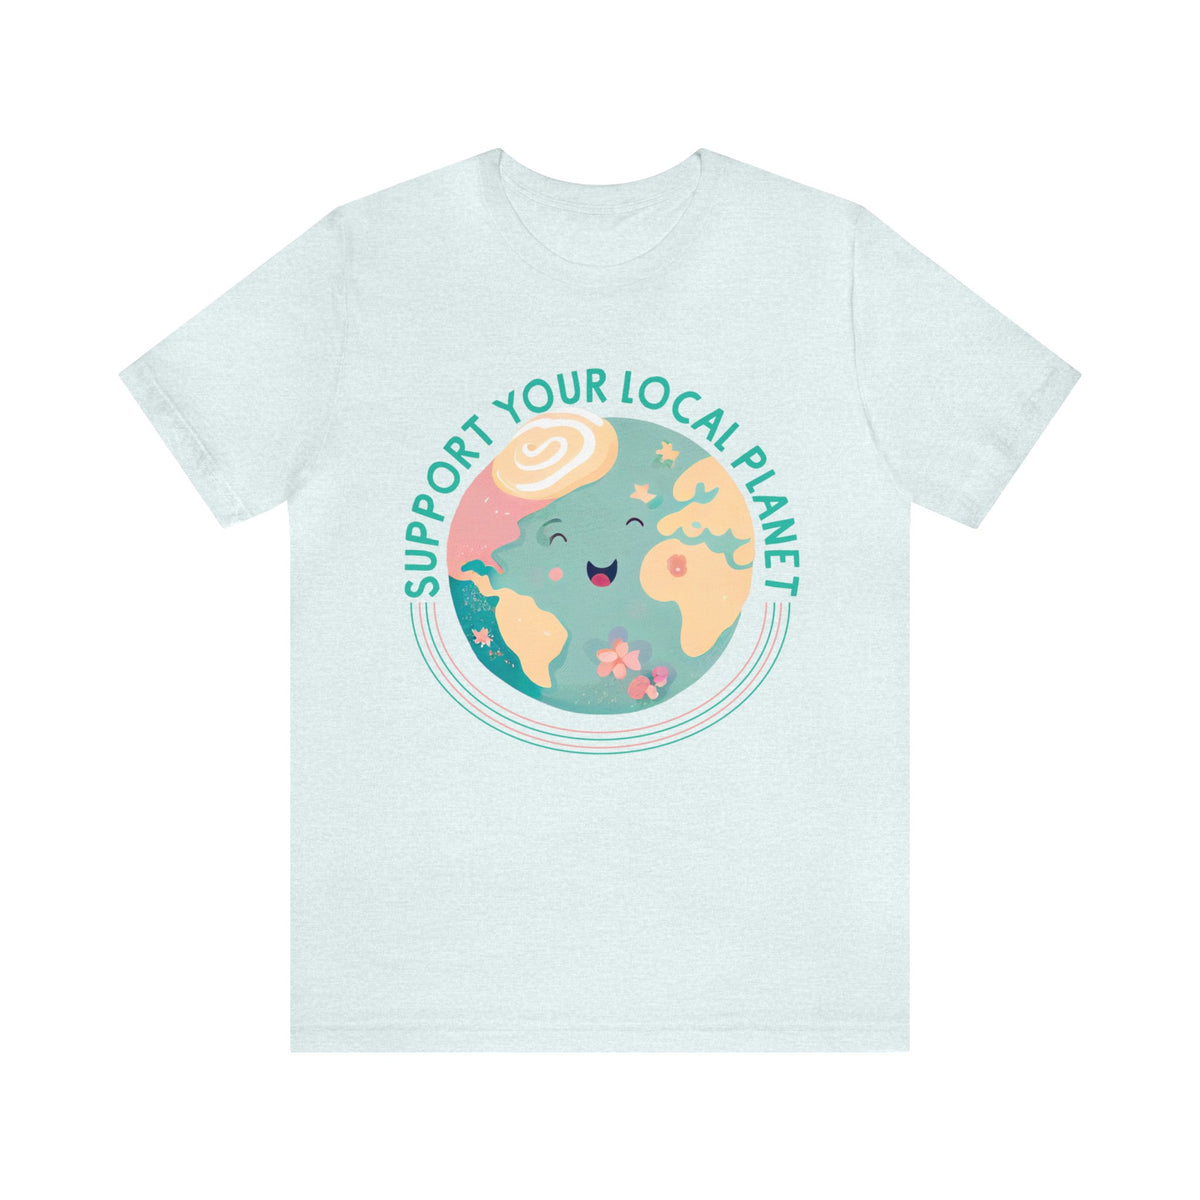 Support Your Local Planet Earth Day Shirt | Kawaii Style shirt | Nature Shirt | Gift For Her | Super Soft Shirt | Unisex Jersey T-shirt